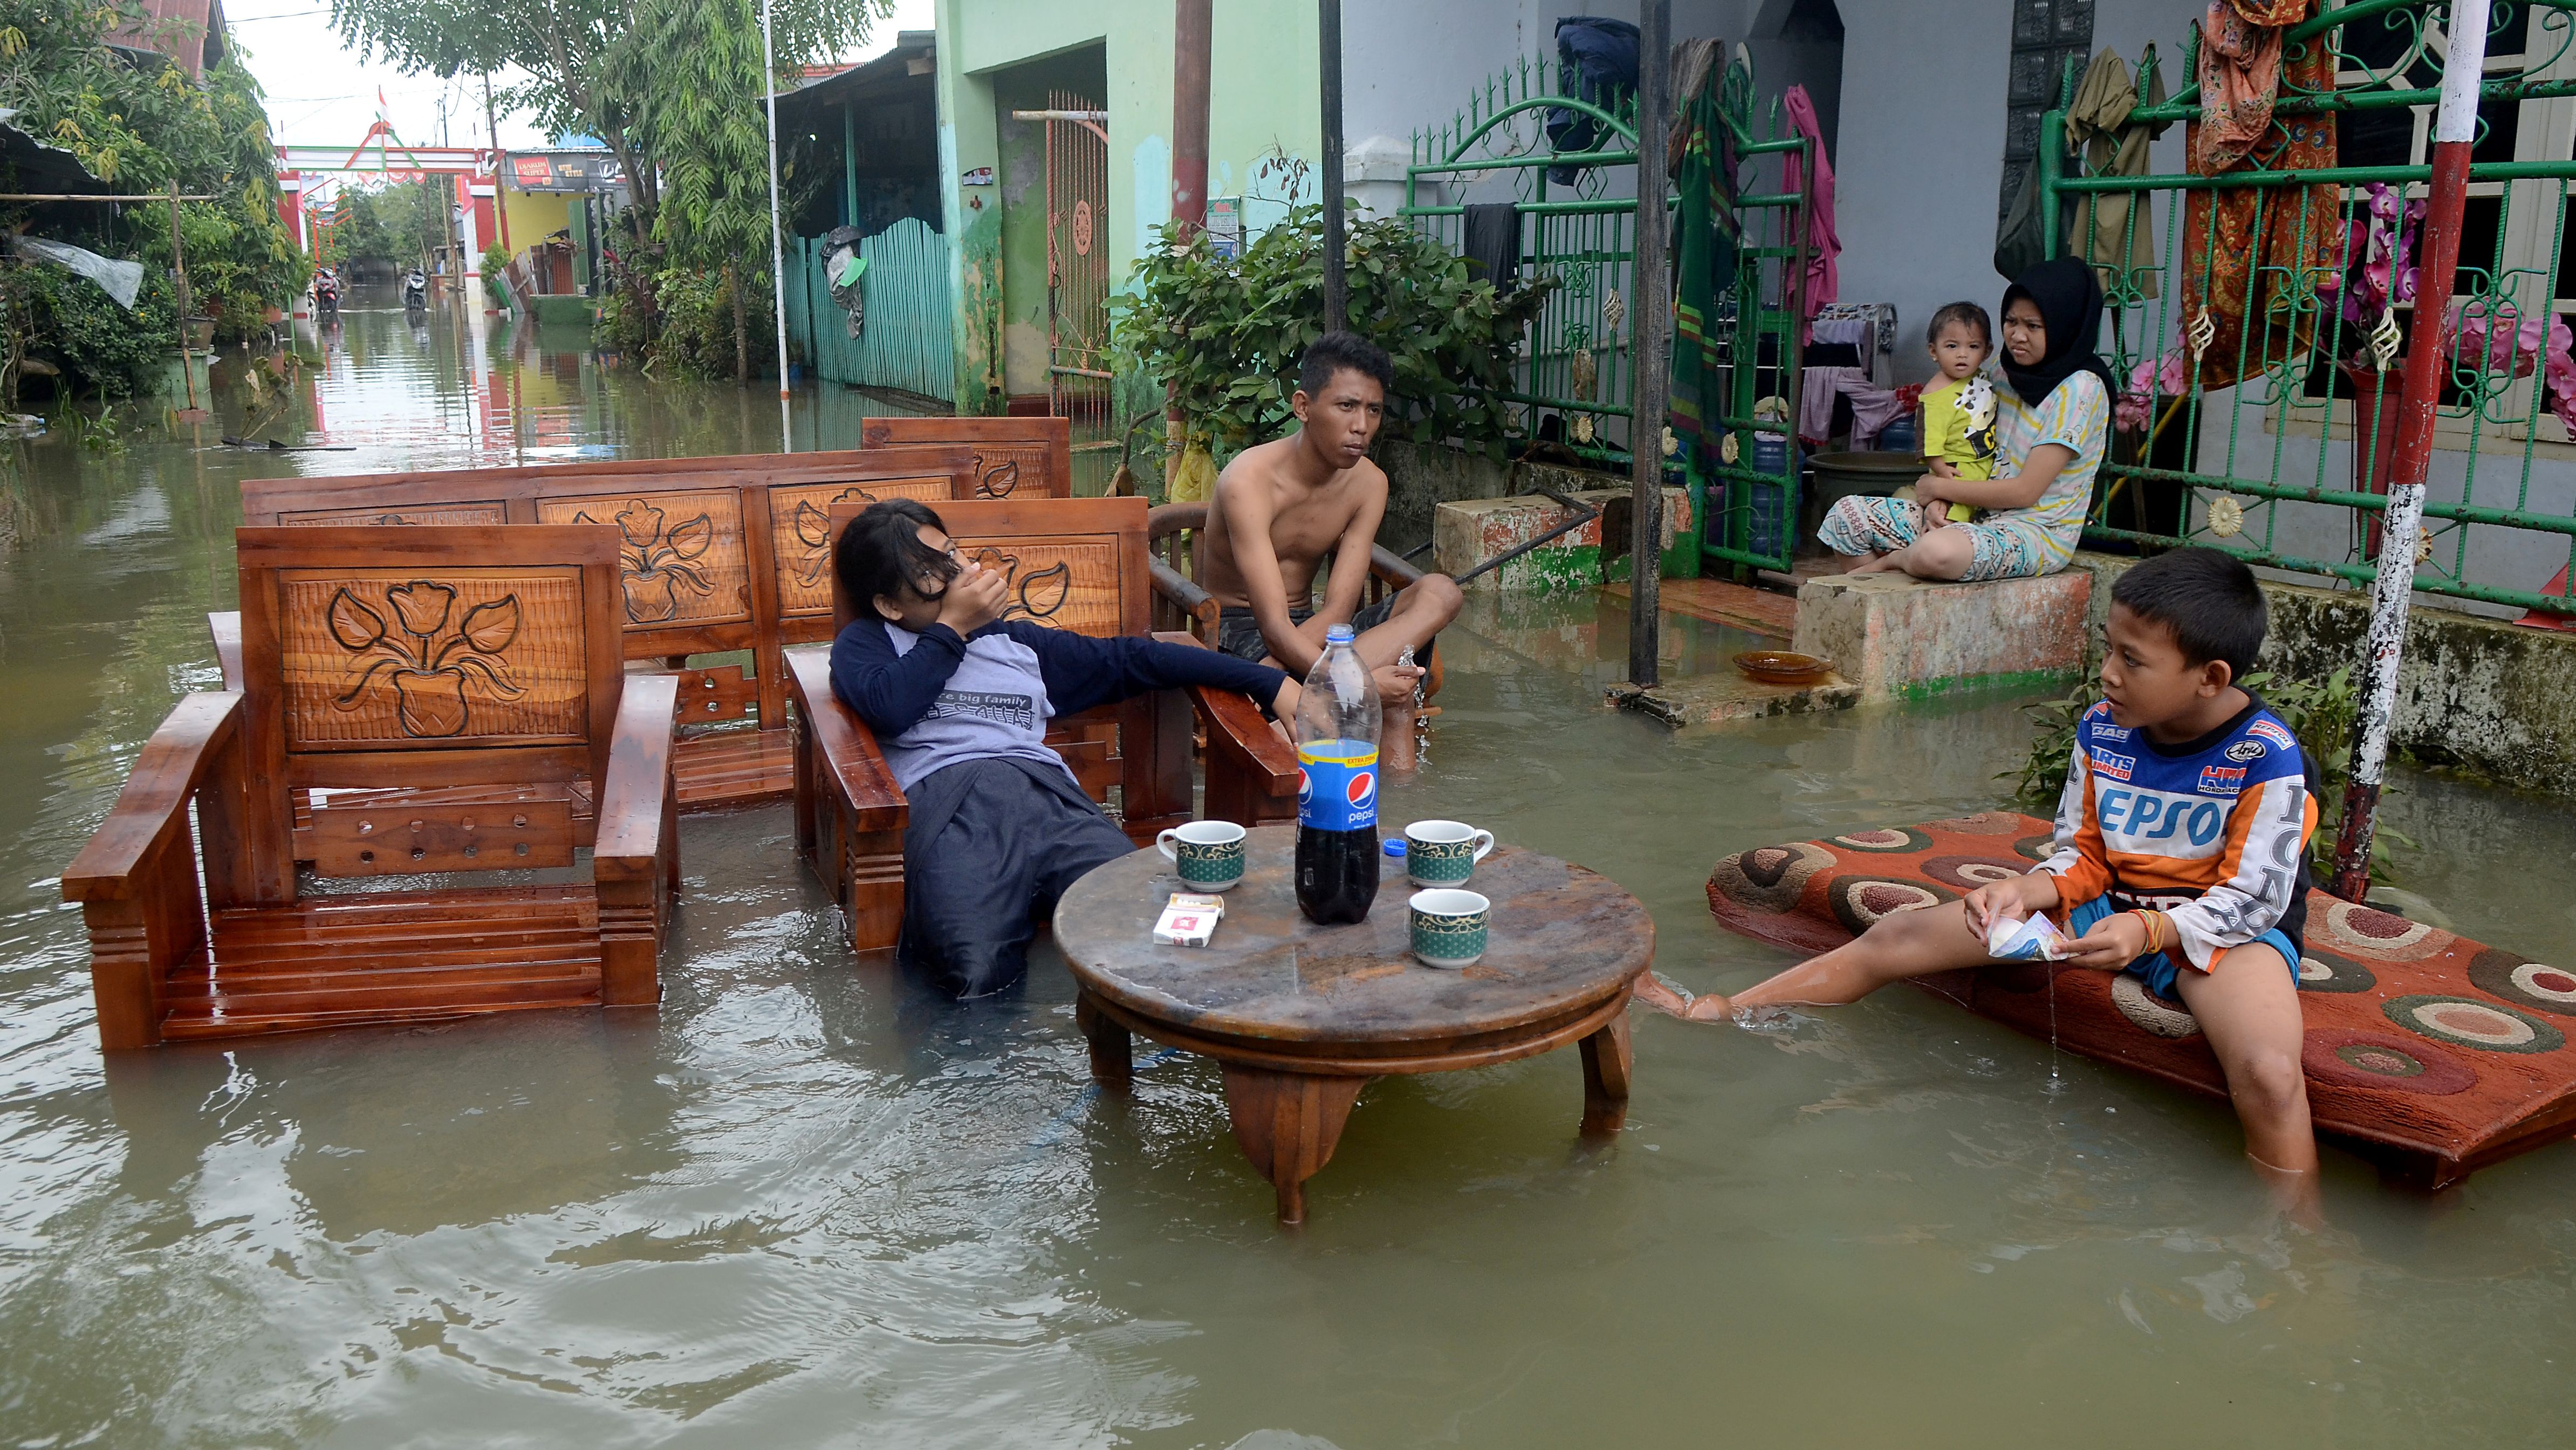 Residents sit on furniture following floods in Makassar, Indonesia, on Friday, January 25.